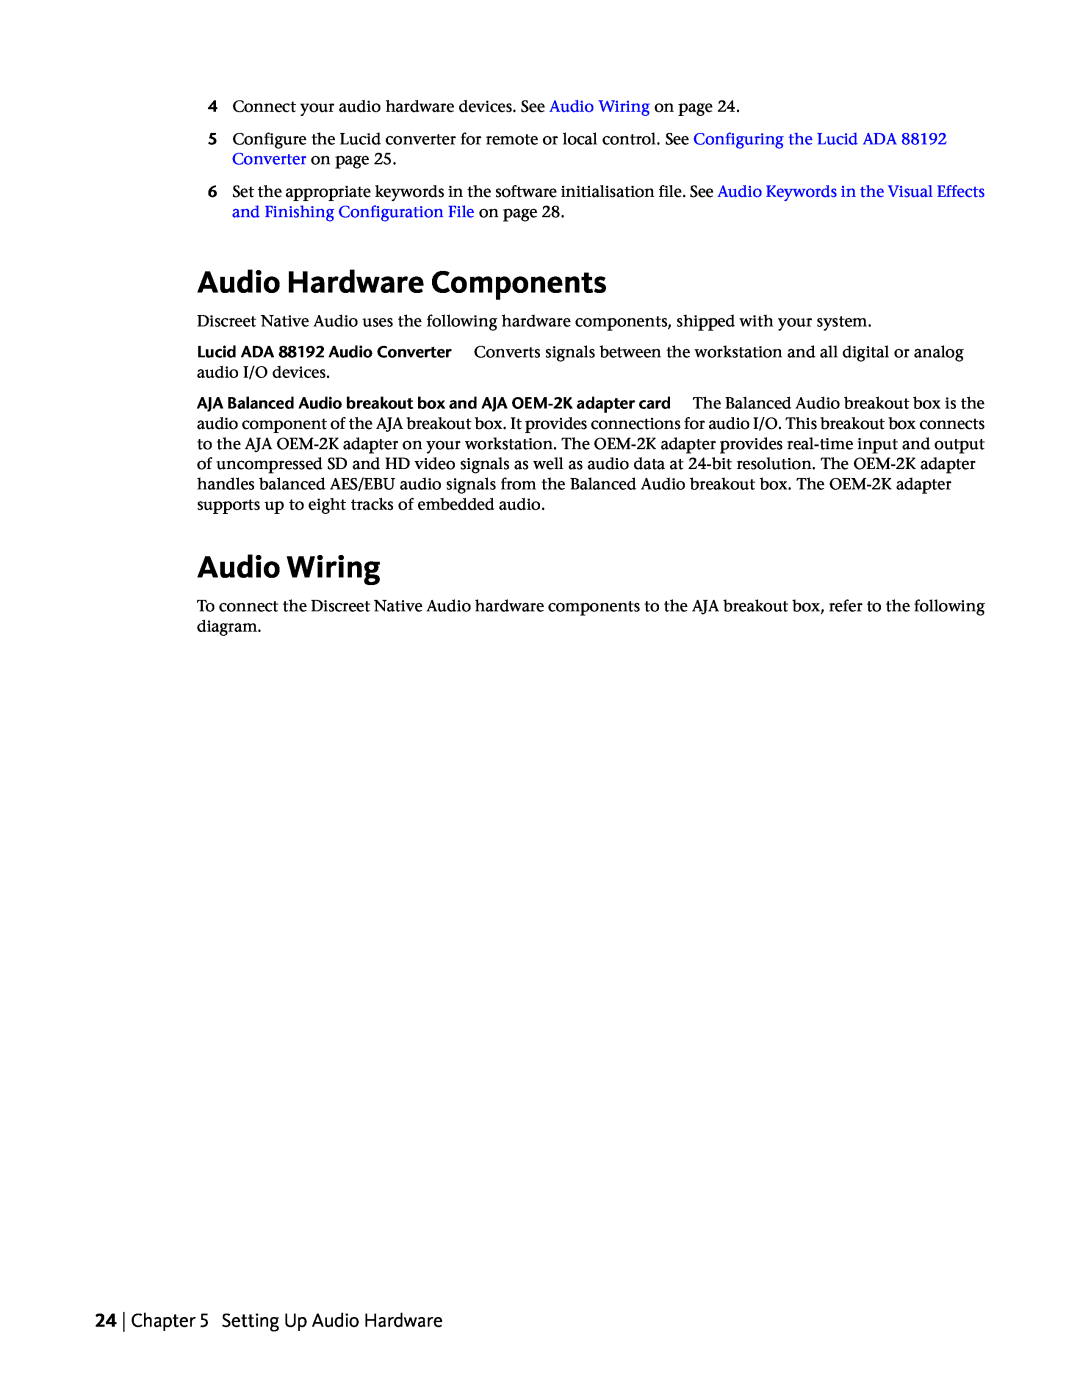 HP Z800 manual Audio Hardware Components, Audio Wiring, Setting Up Audio Hardware 